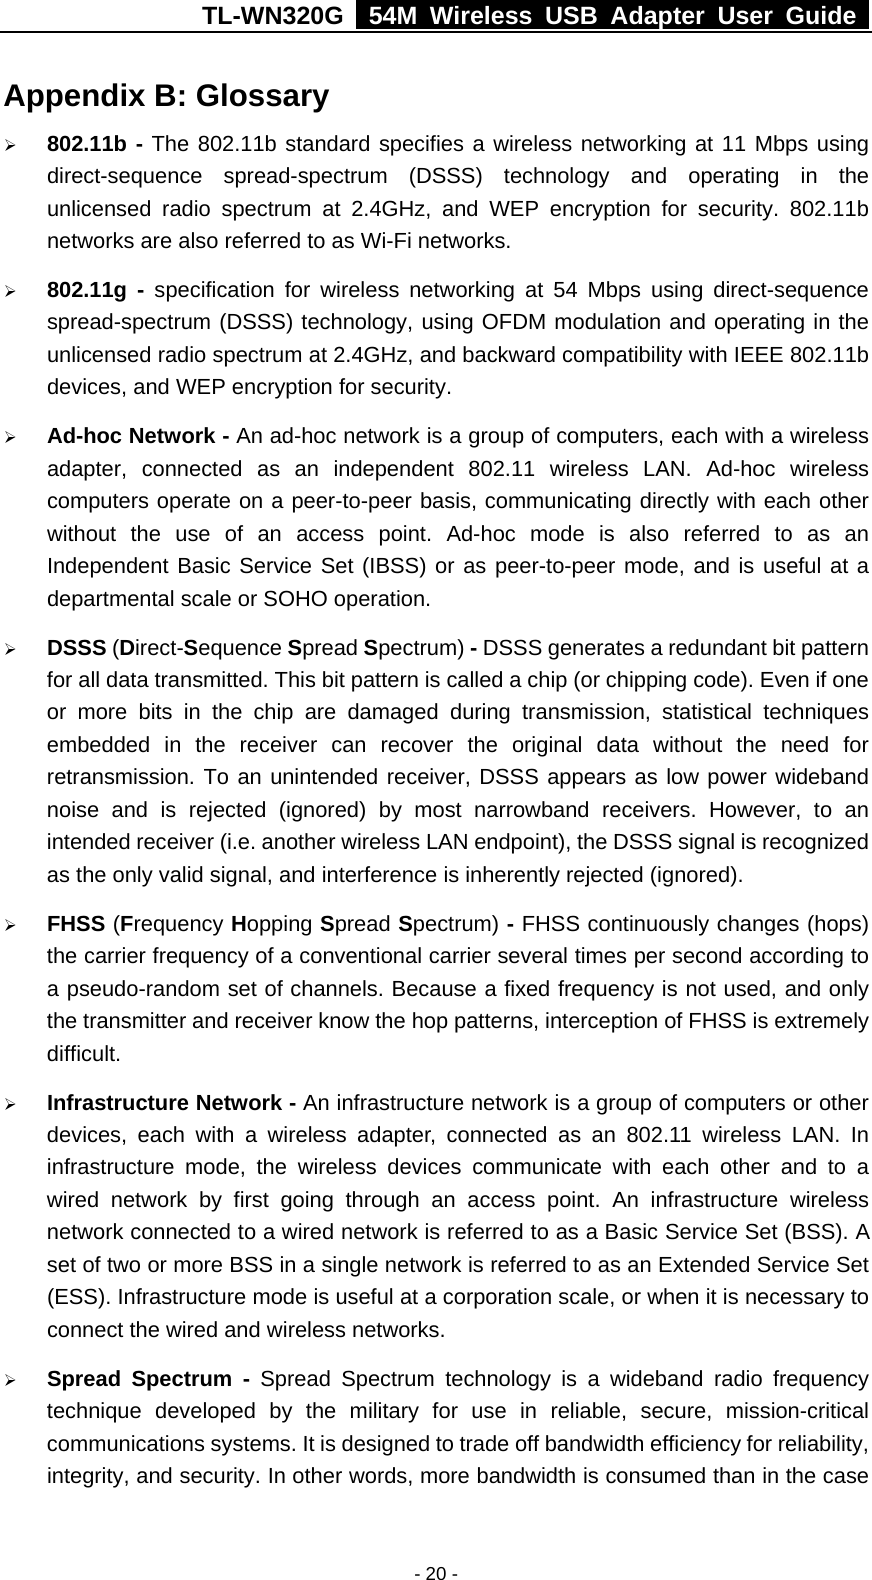 TL-WN320G   54M Wireless USB Adapter User Guide  - 20 - Appendix B: Glossary ¾ 802.11b - The 802.11b standard specifies a wireless networking at 11 Mbps using direct-sequence spread-spectrum (DSSS) technology and operating in the unlicensed radio spectrum at 2.4GHz, and WEP encryption for security. 802.11b networks are also referred to as Wi-Fi networks. ¾ 802.11g - specification for wireless networking at 54 Mbps using direct-sequence spread-spectrum (DSSS) technology, using OFDM modulation and operating in the unlicensed radio spectrum at 2.4GHz, and backward compatibility with IEEE 802.11b devices, and WEP encryption for security. ¾ Ad-hoc Network - An ad-hoc network is a group of computers, each with a wireless adapter, connected as an independent 802.11 wireless LAN. Ad-hoc wireless computers operate on a peer-to-peer basis, communicating directly with each other without the use of an access point. Ad-hoc mode is also referred to as an Independent Basic Service Set (IBSS) or as peer-to-peer mode, and is useful at a departmental scale or SOHO operation. ¾ DSSS (Direct-Sequence Spread Spectrum) - DSSS generates a redundant bit pattern for all data transmitted. This bit pattern is called a chip (or chipping code). Even if one or more bits in the chip are damaged during transmission, statistical techniques embedded in the receiver can recover the original data without the need for retransmission. To an unintended receiver, DSSS appears as low power wideband noise and is rejected (ignored) by most narrowband receivers. However, to an intended receiver (i.e. another wireless LAN endpoint), the DSSS signal is recognized as the only valid signal, and interference is inherently rejected (ignored). ¾ FHSS (Frequency Hopping Spread Spectrum) - FHSS continuously changes (hops) the carrier frequency of a conventional carrier several times per second according to a pseudo-random set of channels. Because a fixed frequency is not used, and only the transmitter and receiver know the hop patterns, interception of FHSS is extremely difficult. ¾ Infrastructure Network - An infrastructure network is a group of computers or other devices, each with a wireless adapter, connected as an 802.11 wireless LAN. In infrastructure mode, the wireless devices communicate with each other and to a wired network by first going through an access point. An infrastructure wireless network connected to a wired network is referred to as a Basic Service Set (BSS). A set of two or more BSS in a single network is referred to as an Extended Service Set (ESS). Infrastructure mode is useful at a corporation scale, or when it is necessary to connect the wired and wireless networks.   ¾ Spread Spectrum - Spread Spectrum technology is a wideband radio frequency technique developed by the military for use in reliable, secure, mission-critical communications systems. It is designed to trade off bandwidth efficiency for reliability, integrity, and security. In other words, more bandwidth is consumed than in the case 